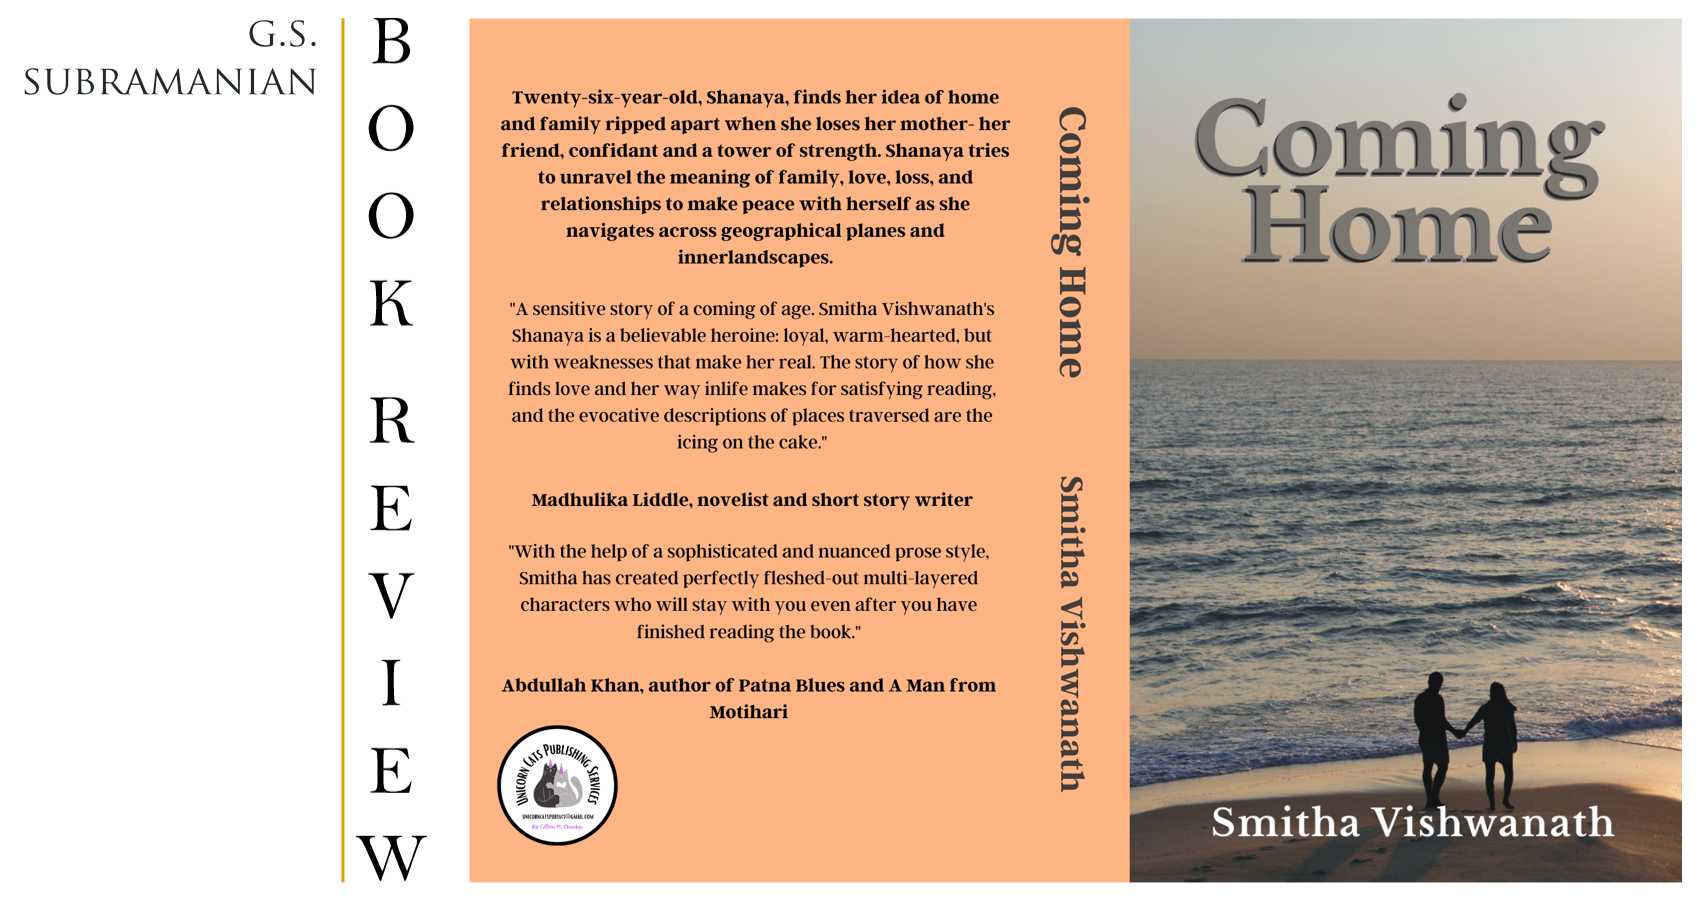 Coming Home by Smitha Vishwanath - Book Review at Spillwords.com